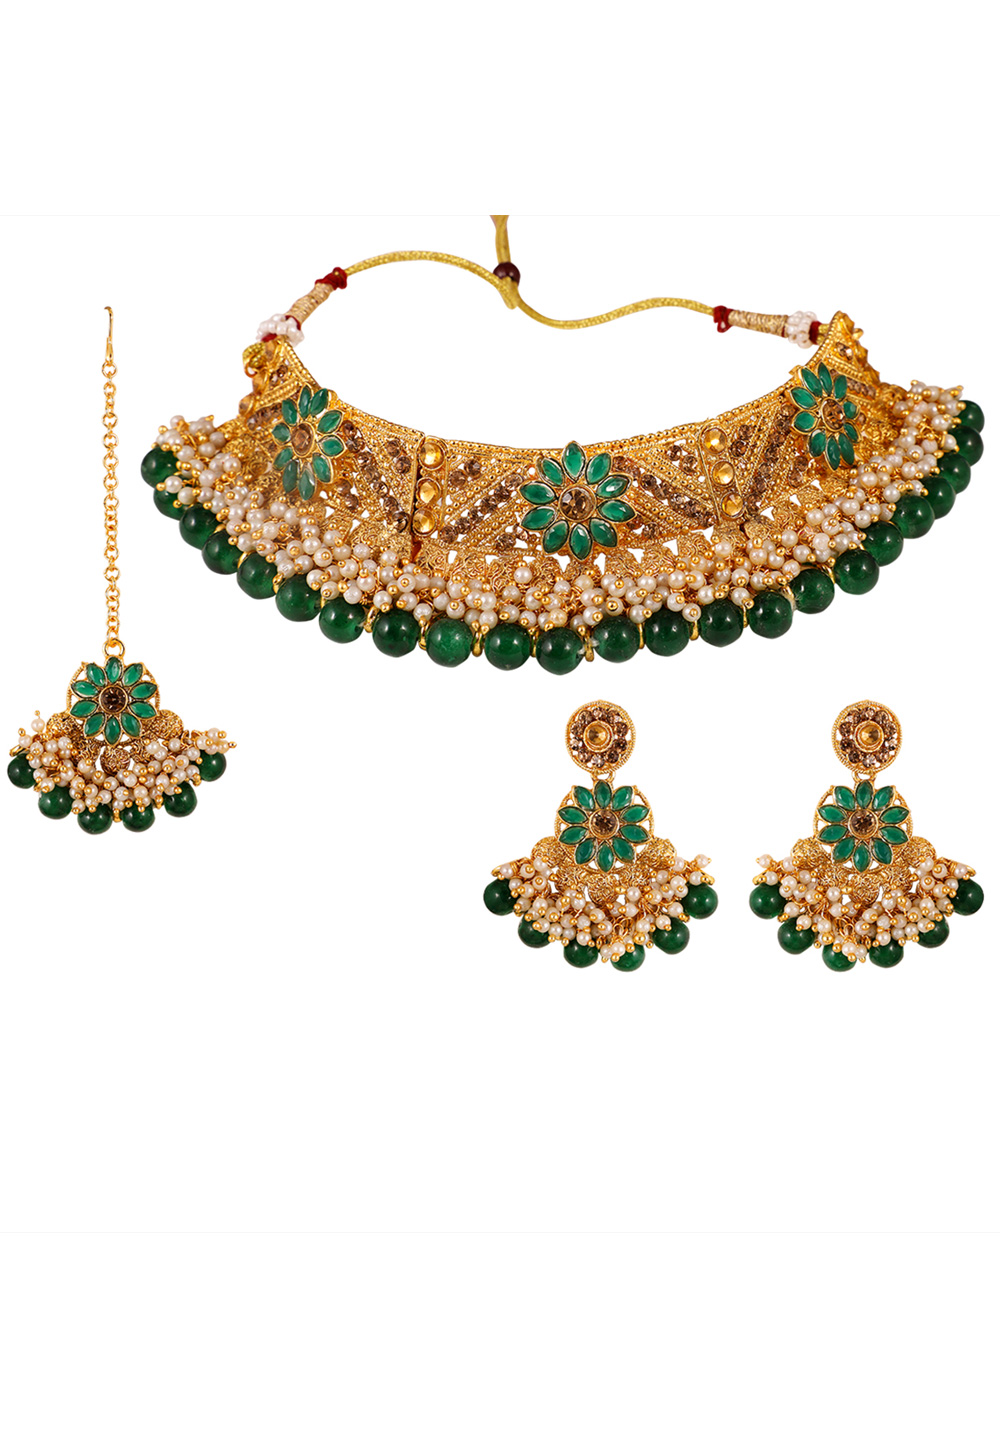 Green Alloy Artificial Stone Necklace Set With Earrings and Maang Tikka 254208